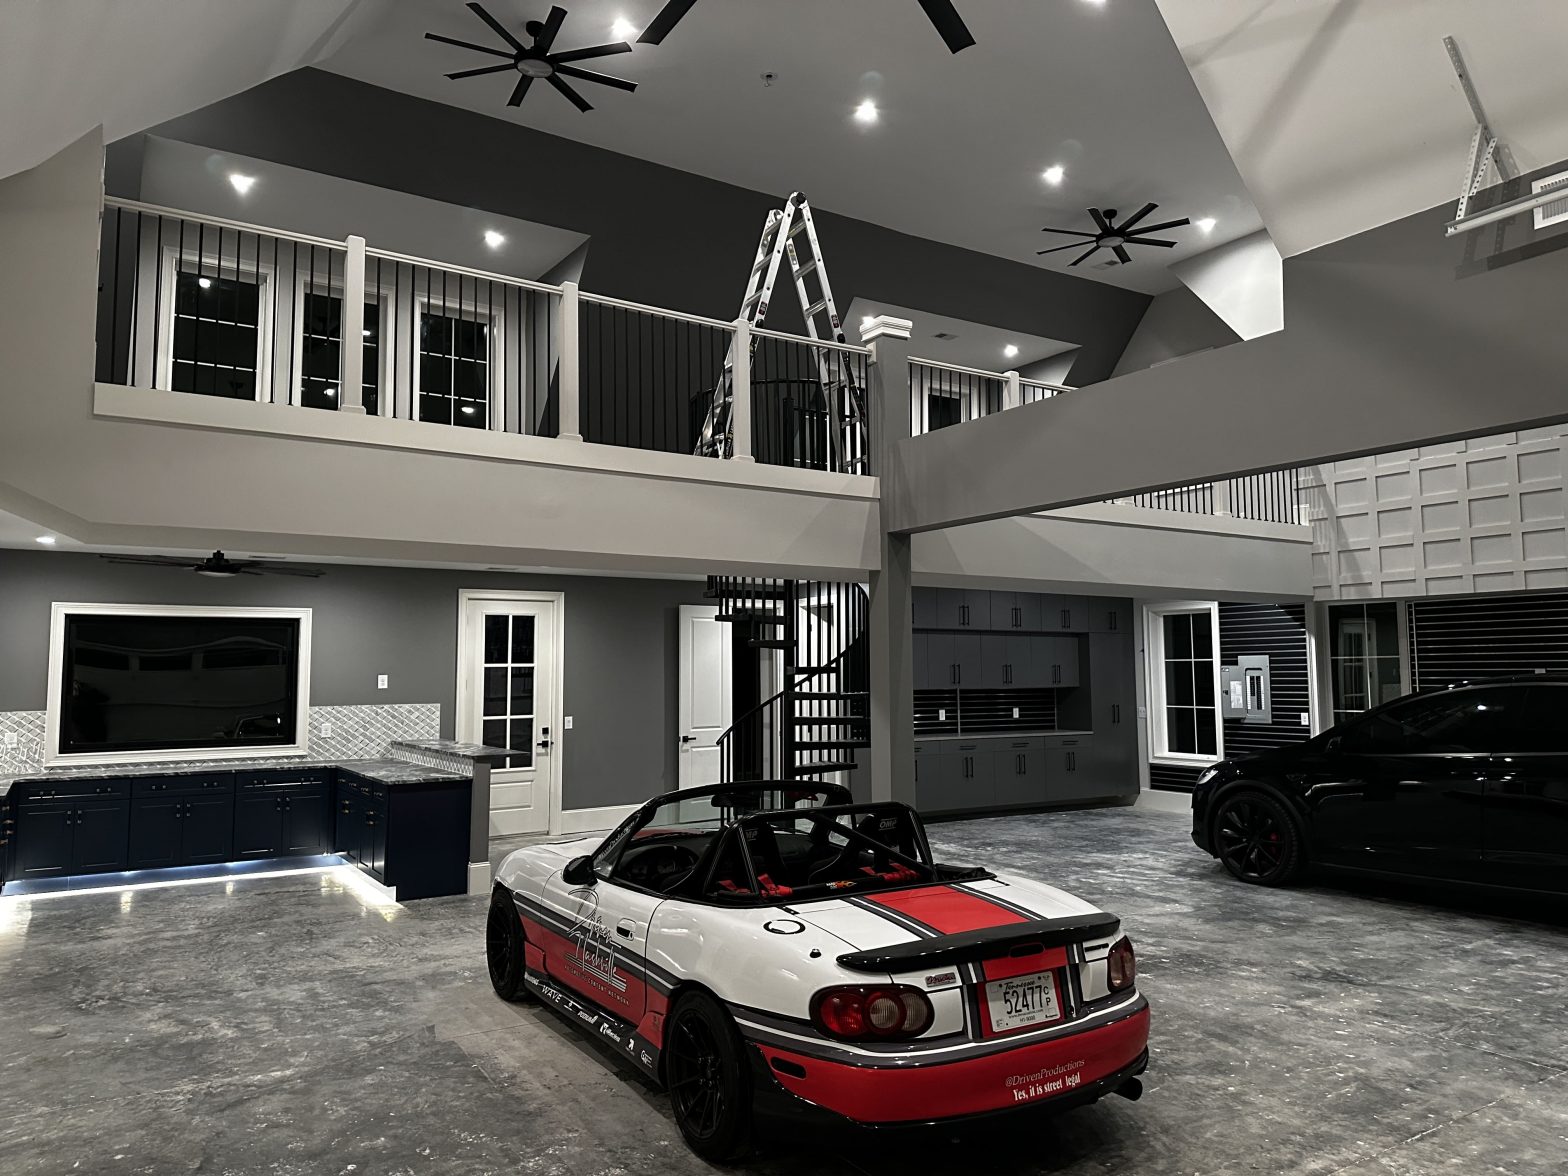 Image of the inside of a new home addition in Nashville, specifically a detached garage.